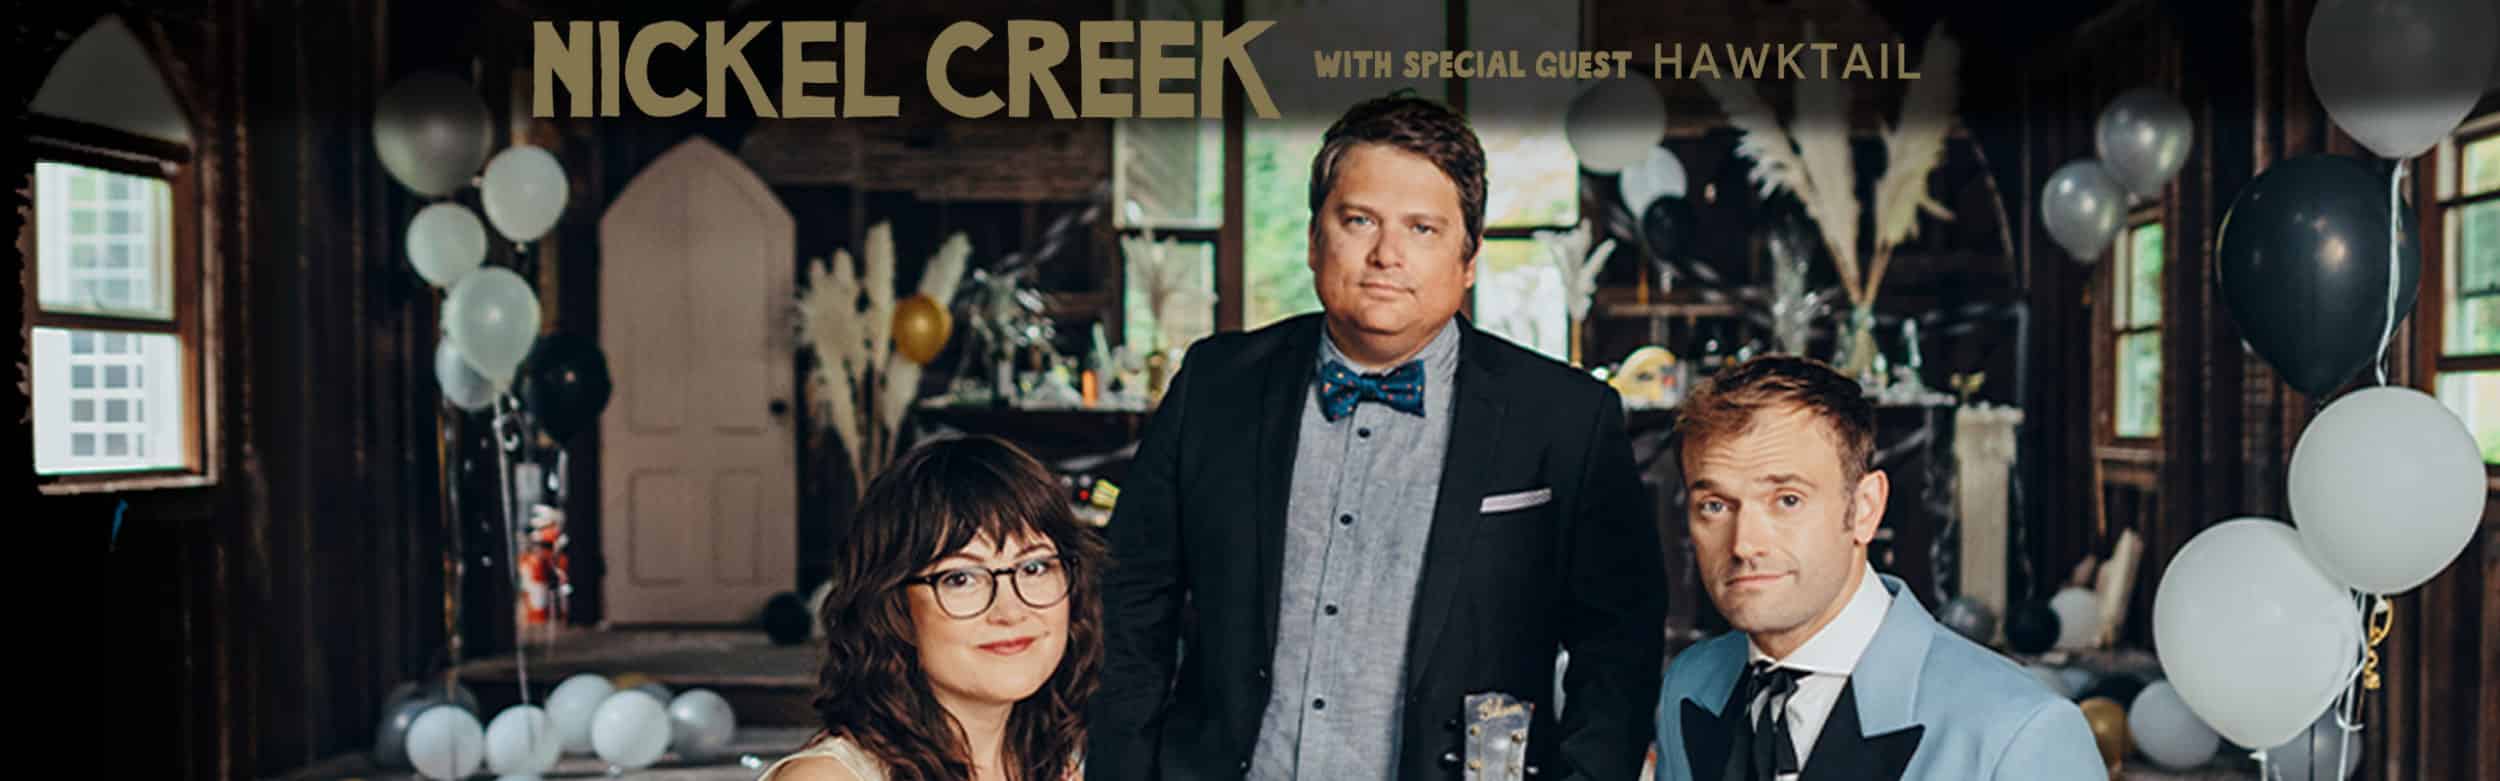 'Nickel Creek with special guest Hawktail